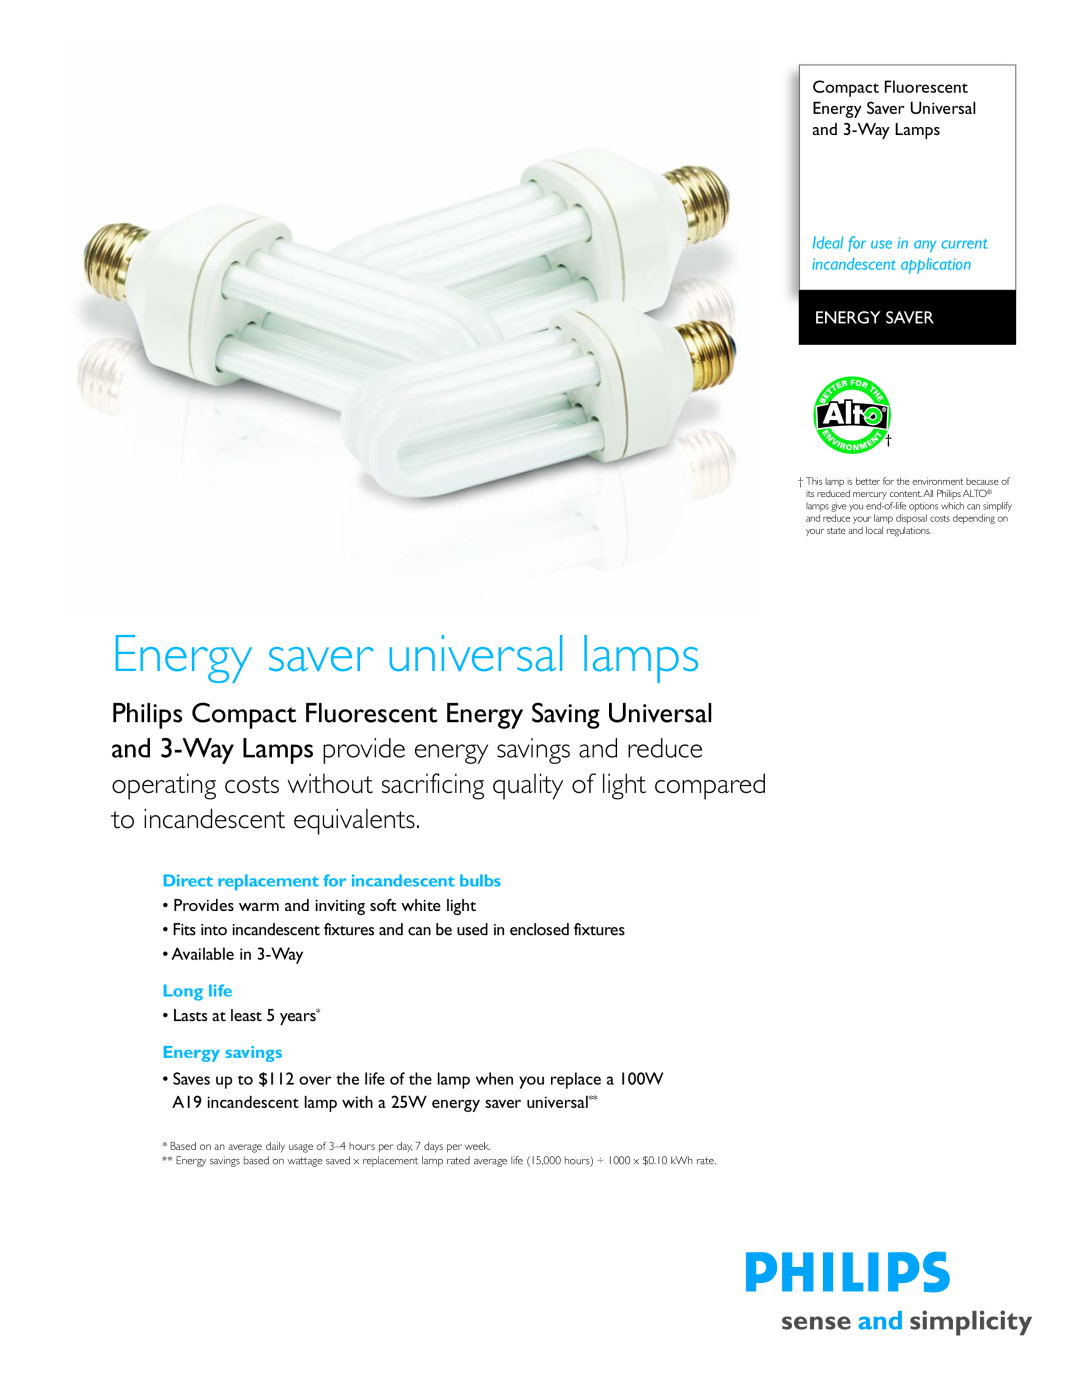 Philips P-3754-D manual Energy saver universal lamps, Compact Fluorescent Energy Saver Universal, and 3-WayLamps 